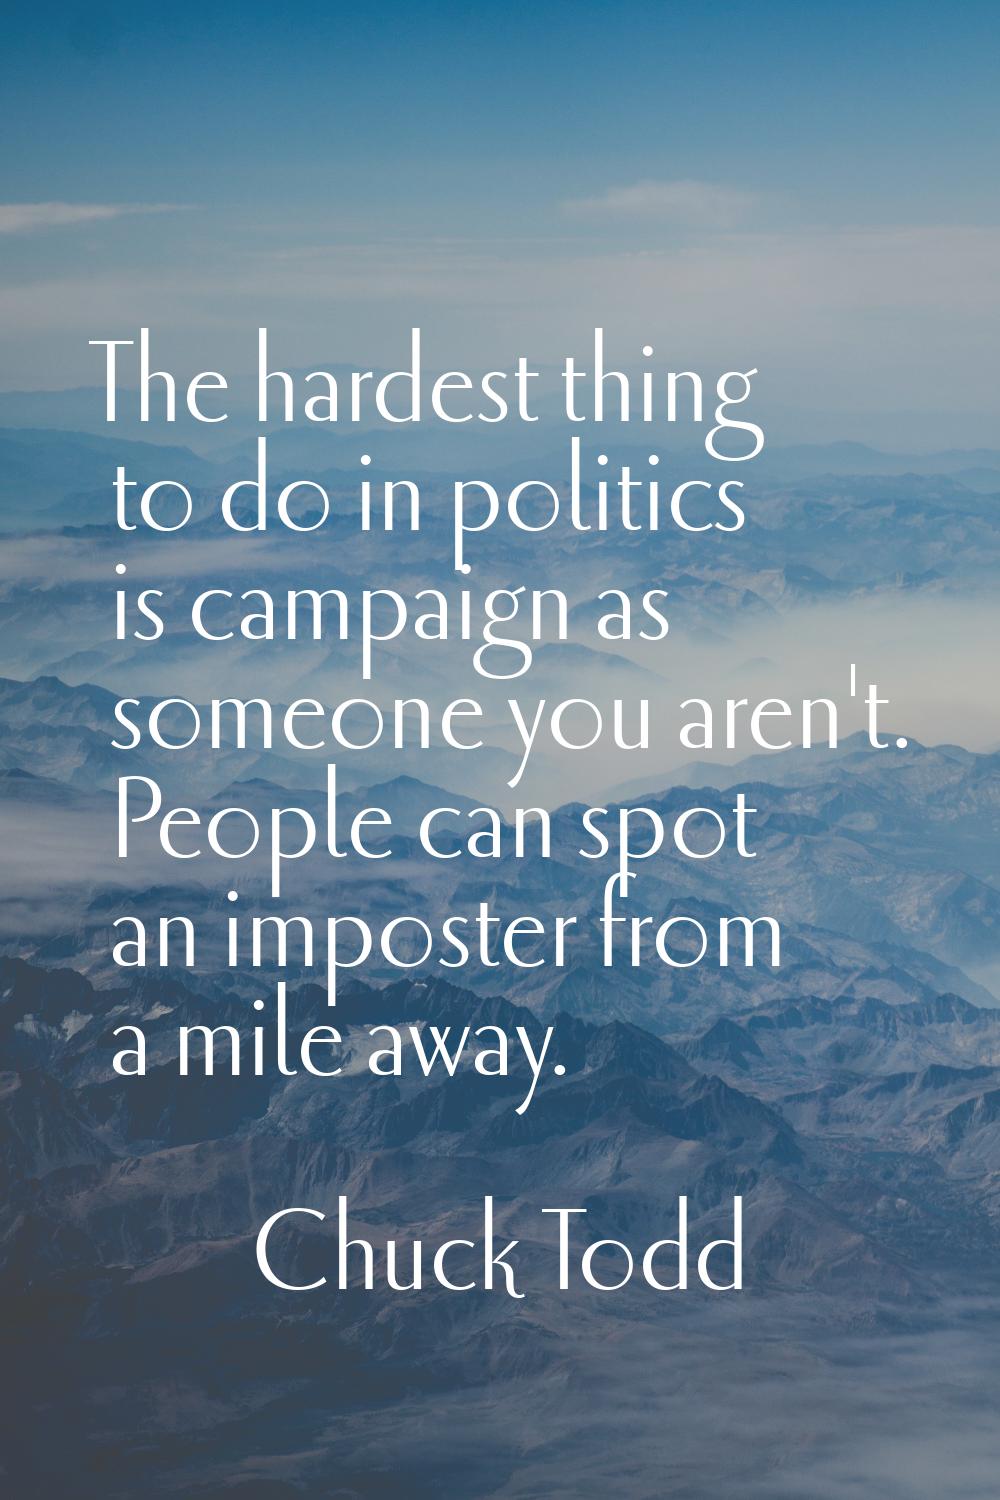 The hardest thing to do in politics is campaign as someone you aren't. People can spot an imposter 